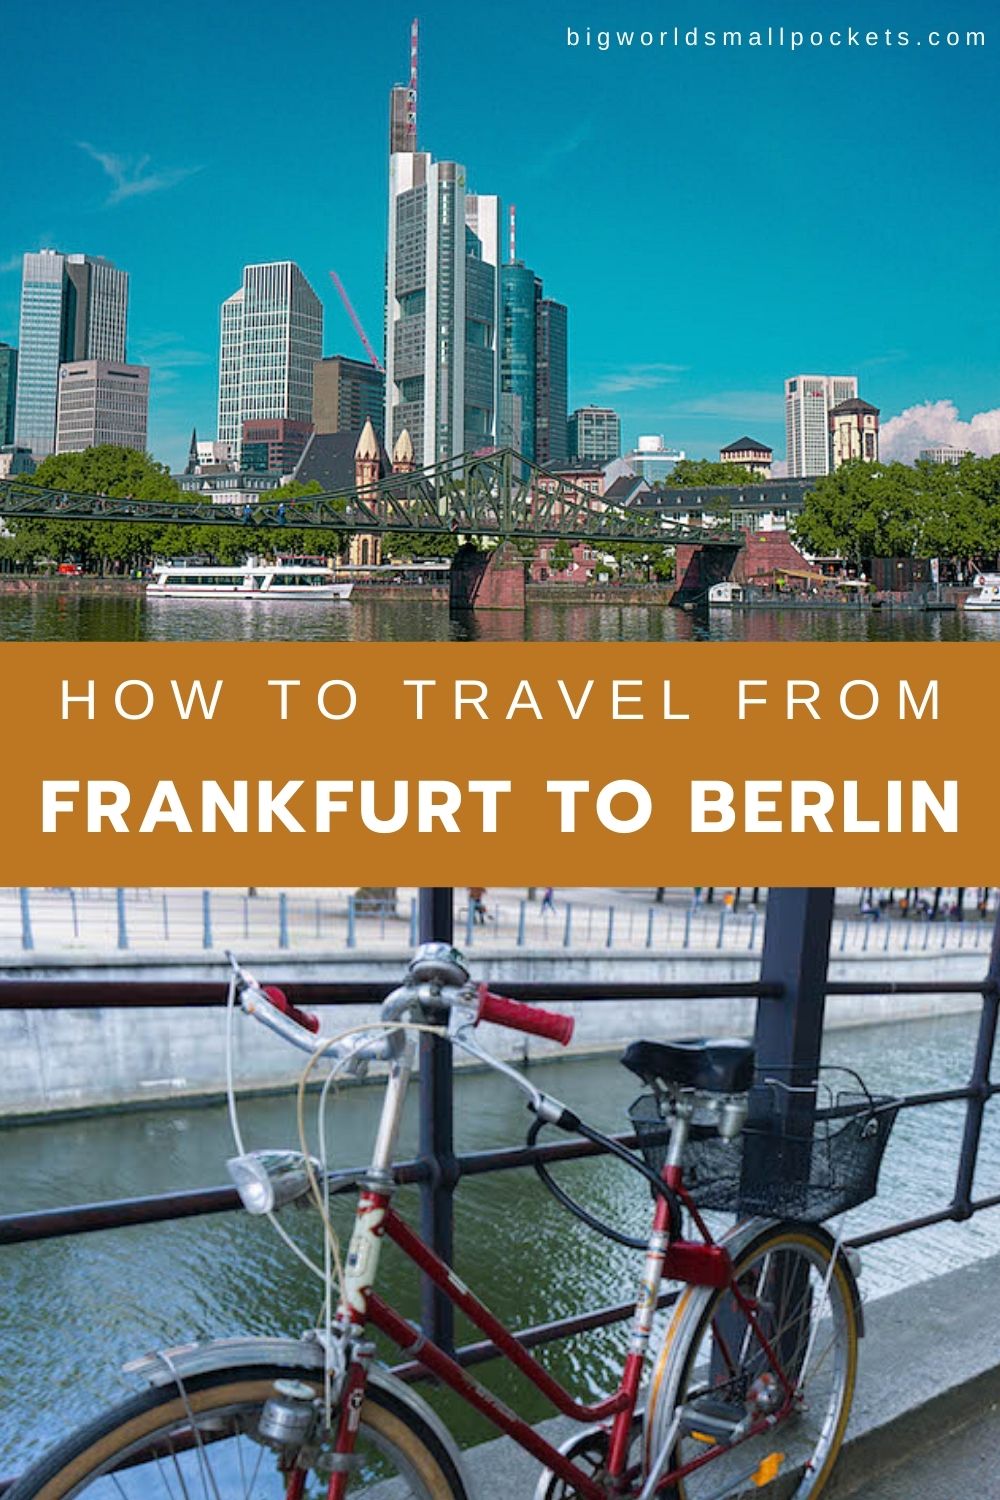 cheapest way to travel to berlin from frankfurt